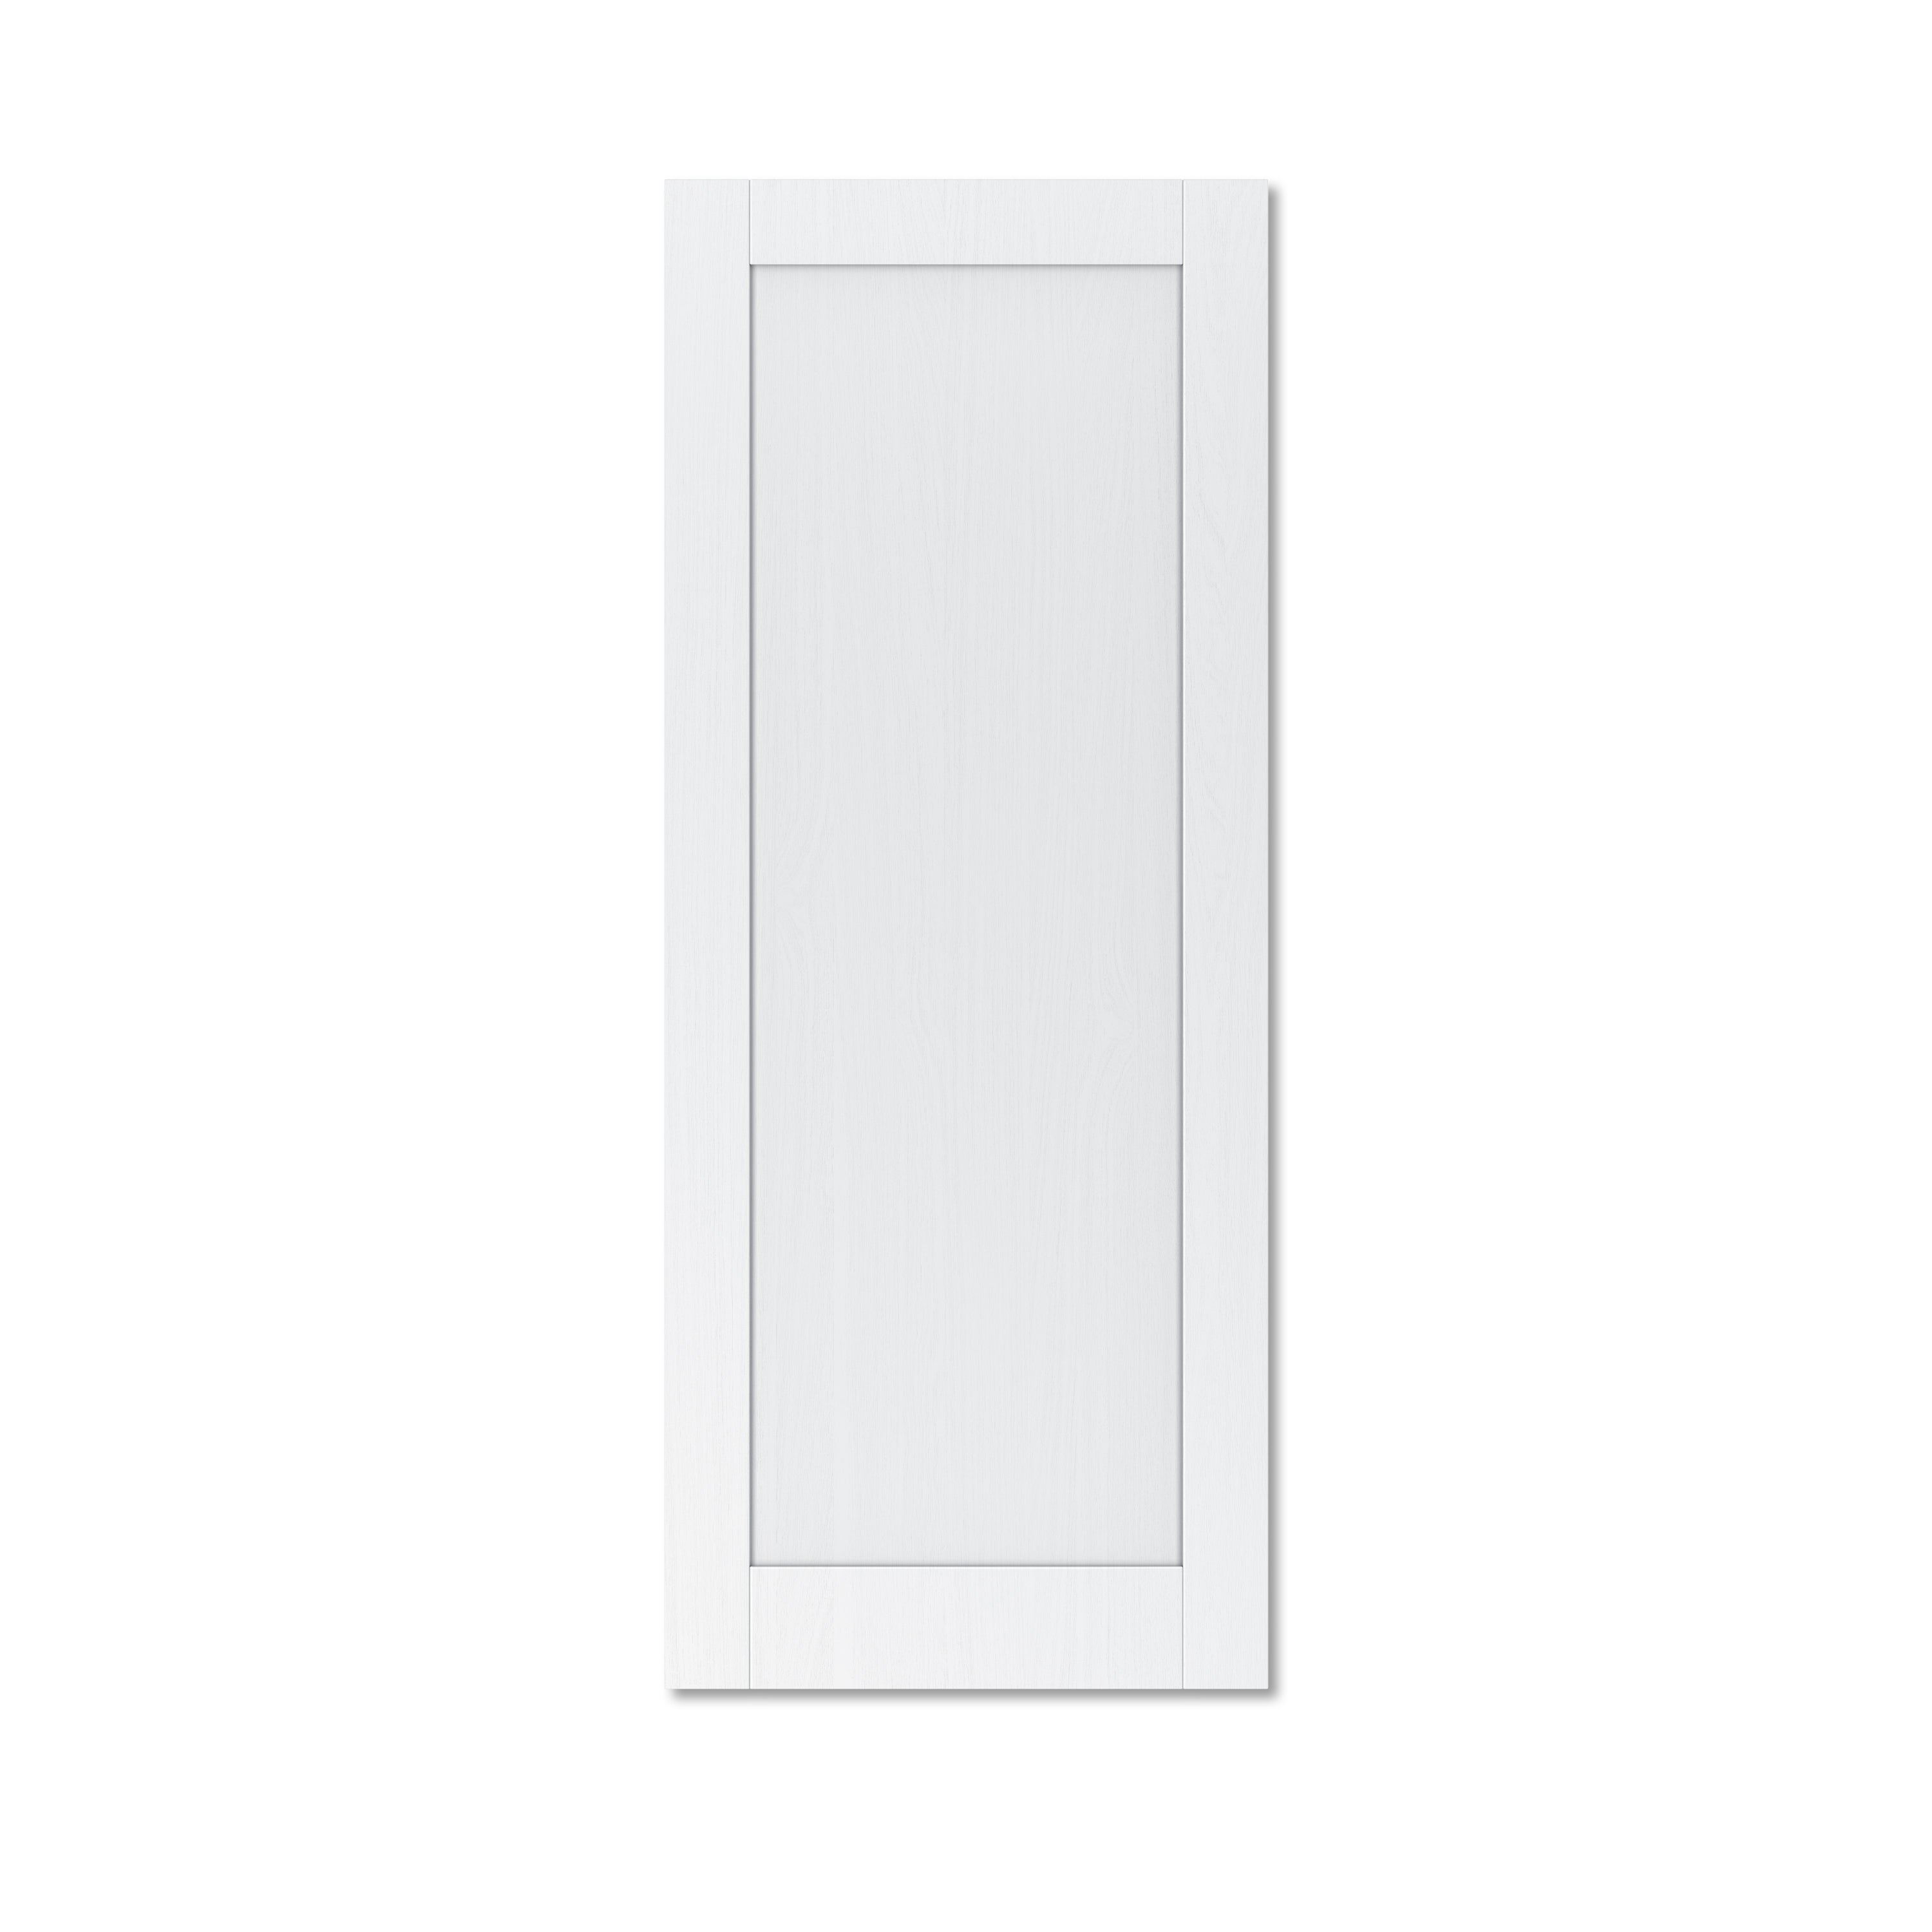 Ark Design Solid Wood Panel Door Slab with/without Prehung Kit, White